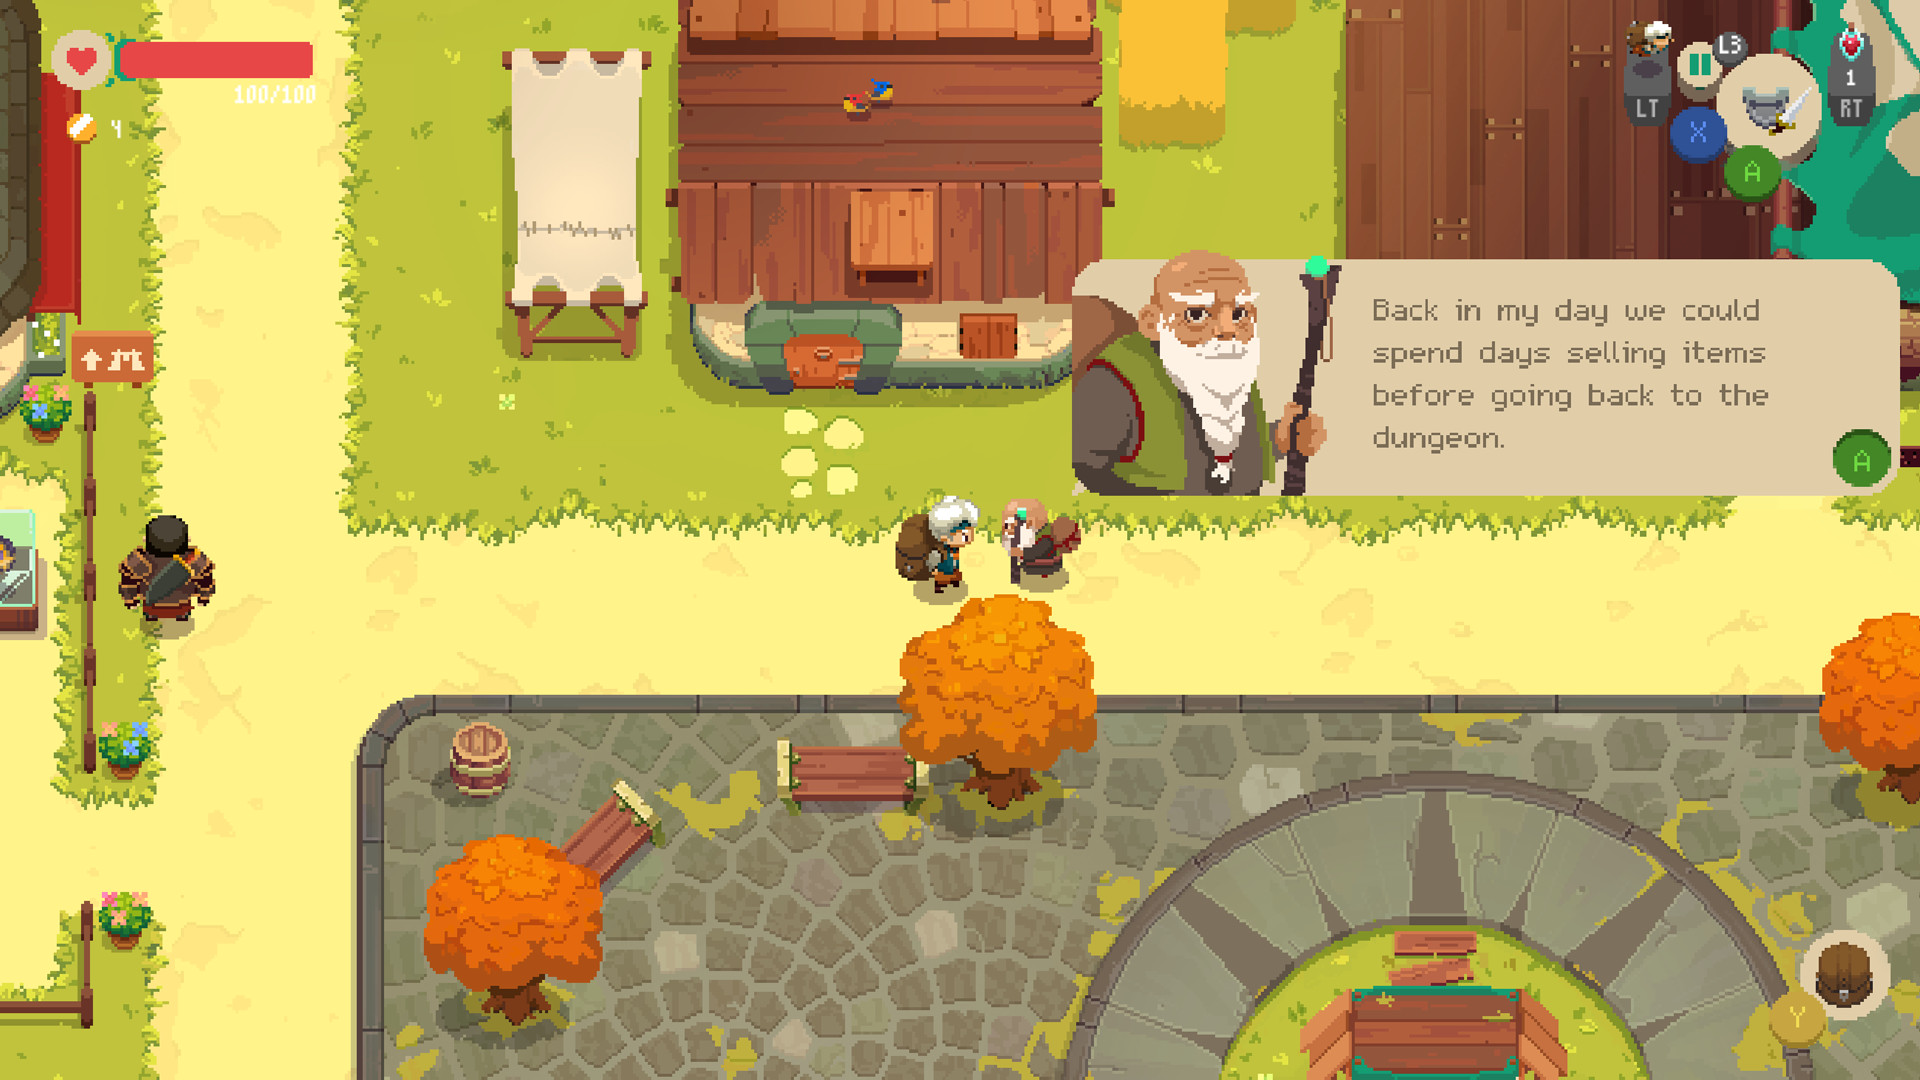 download free moonlighter switch